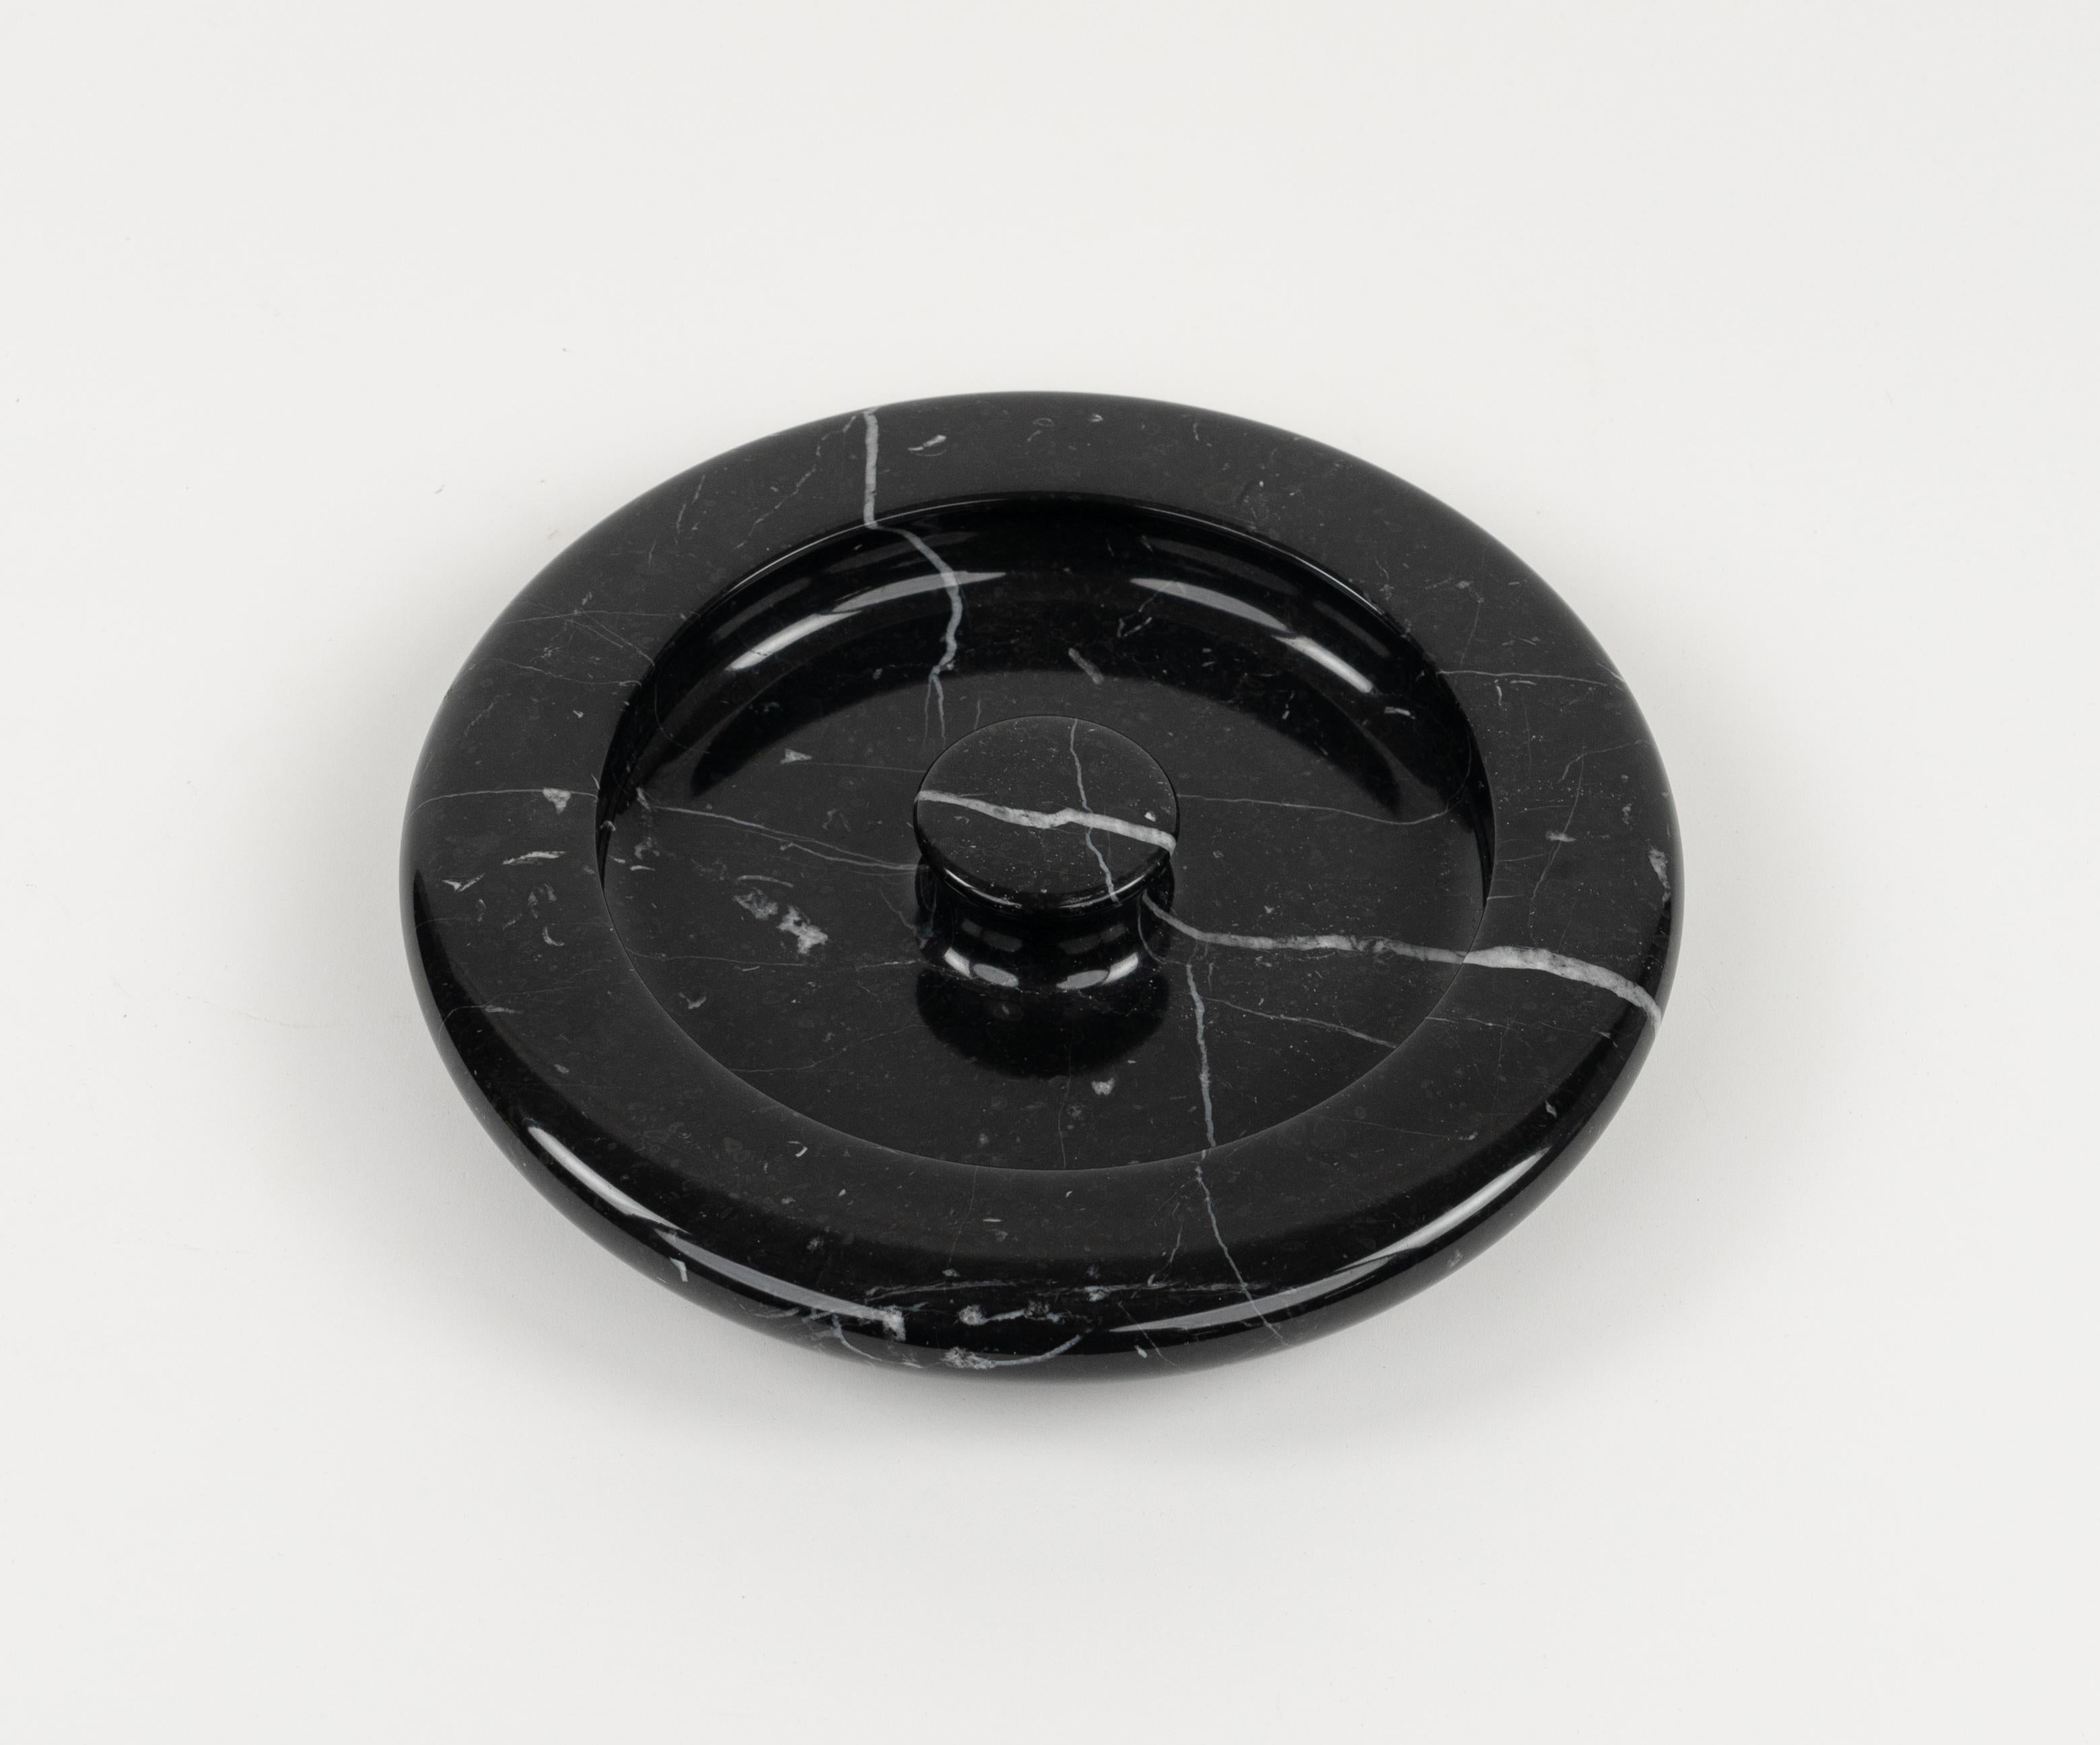 Midcentury amazing round black marble ashtray or vide-poche attributed to Angelo Mangiarotti for Knoll.

Made in Italy in the 1970s.

Perfect desk object or gift idea.

Total weight of 3.2 kg.